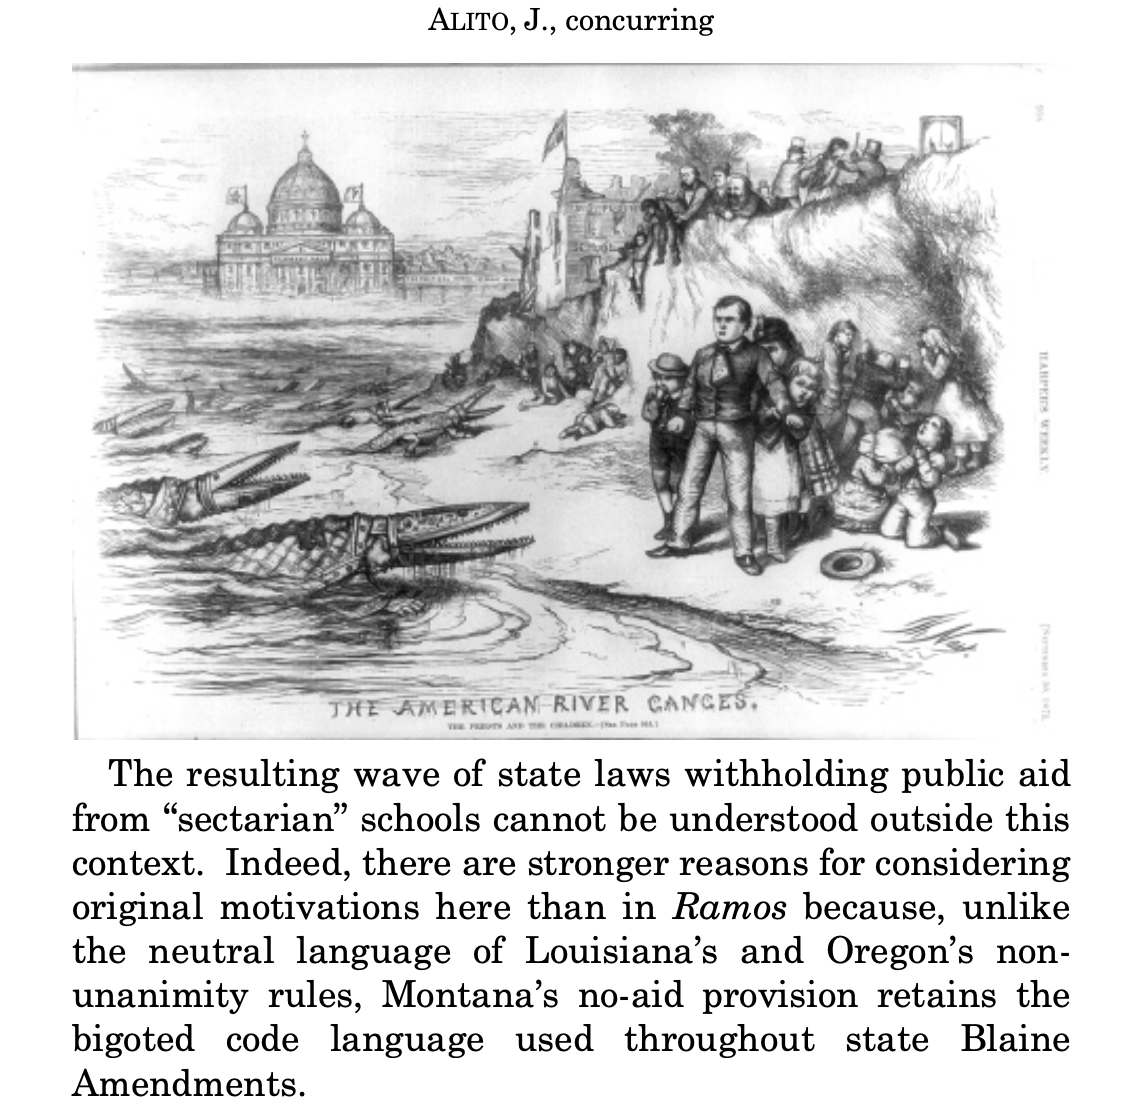 Justice Alito writes a concurrence to highlight the anti-Catholic origins of state 'Blaine amendments' like the one at issue here. He even includes an 1871 political cartoon to show the bigotry toward Catholic schools at the time.